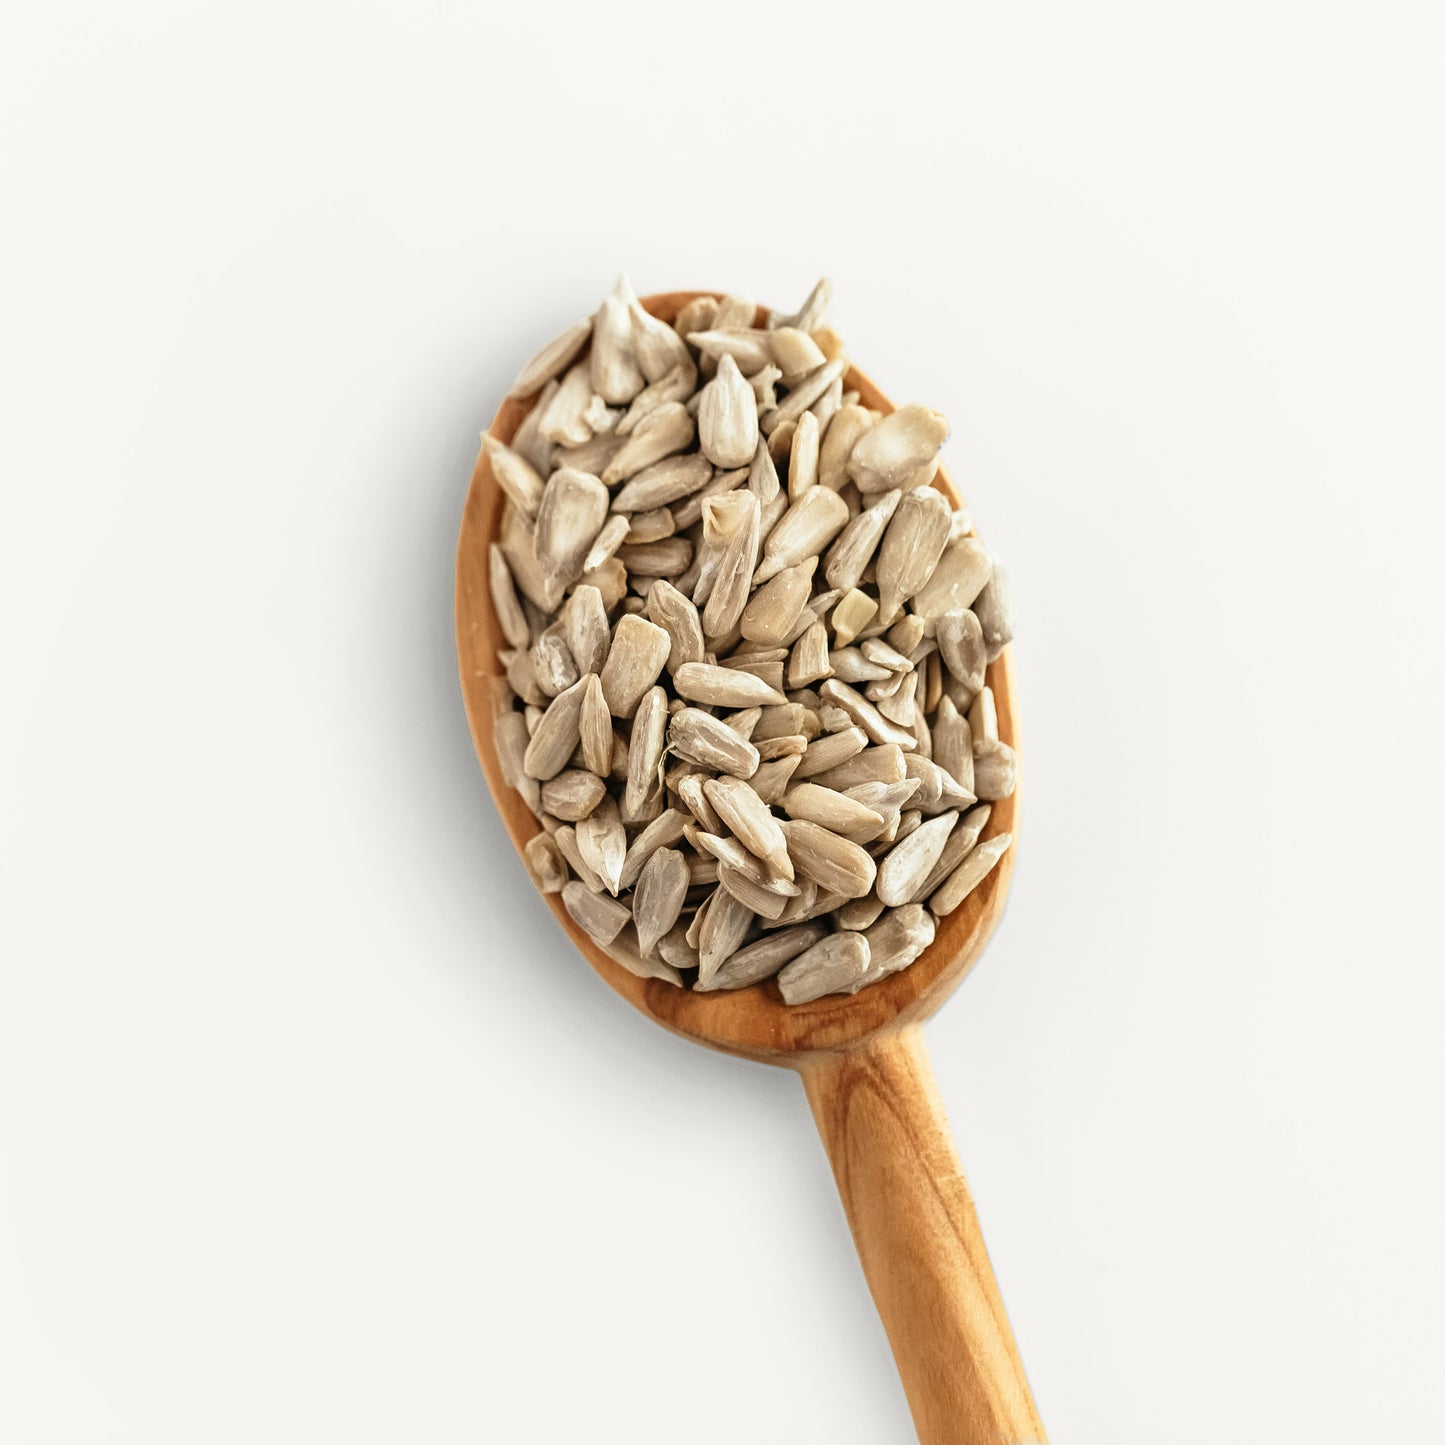 Organic Sunflower seeds (confectionery)